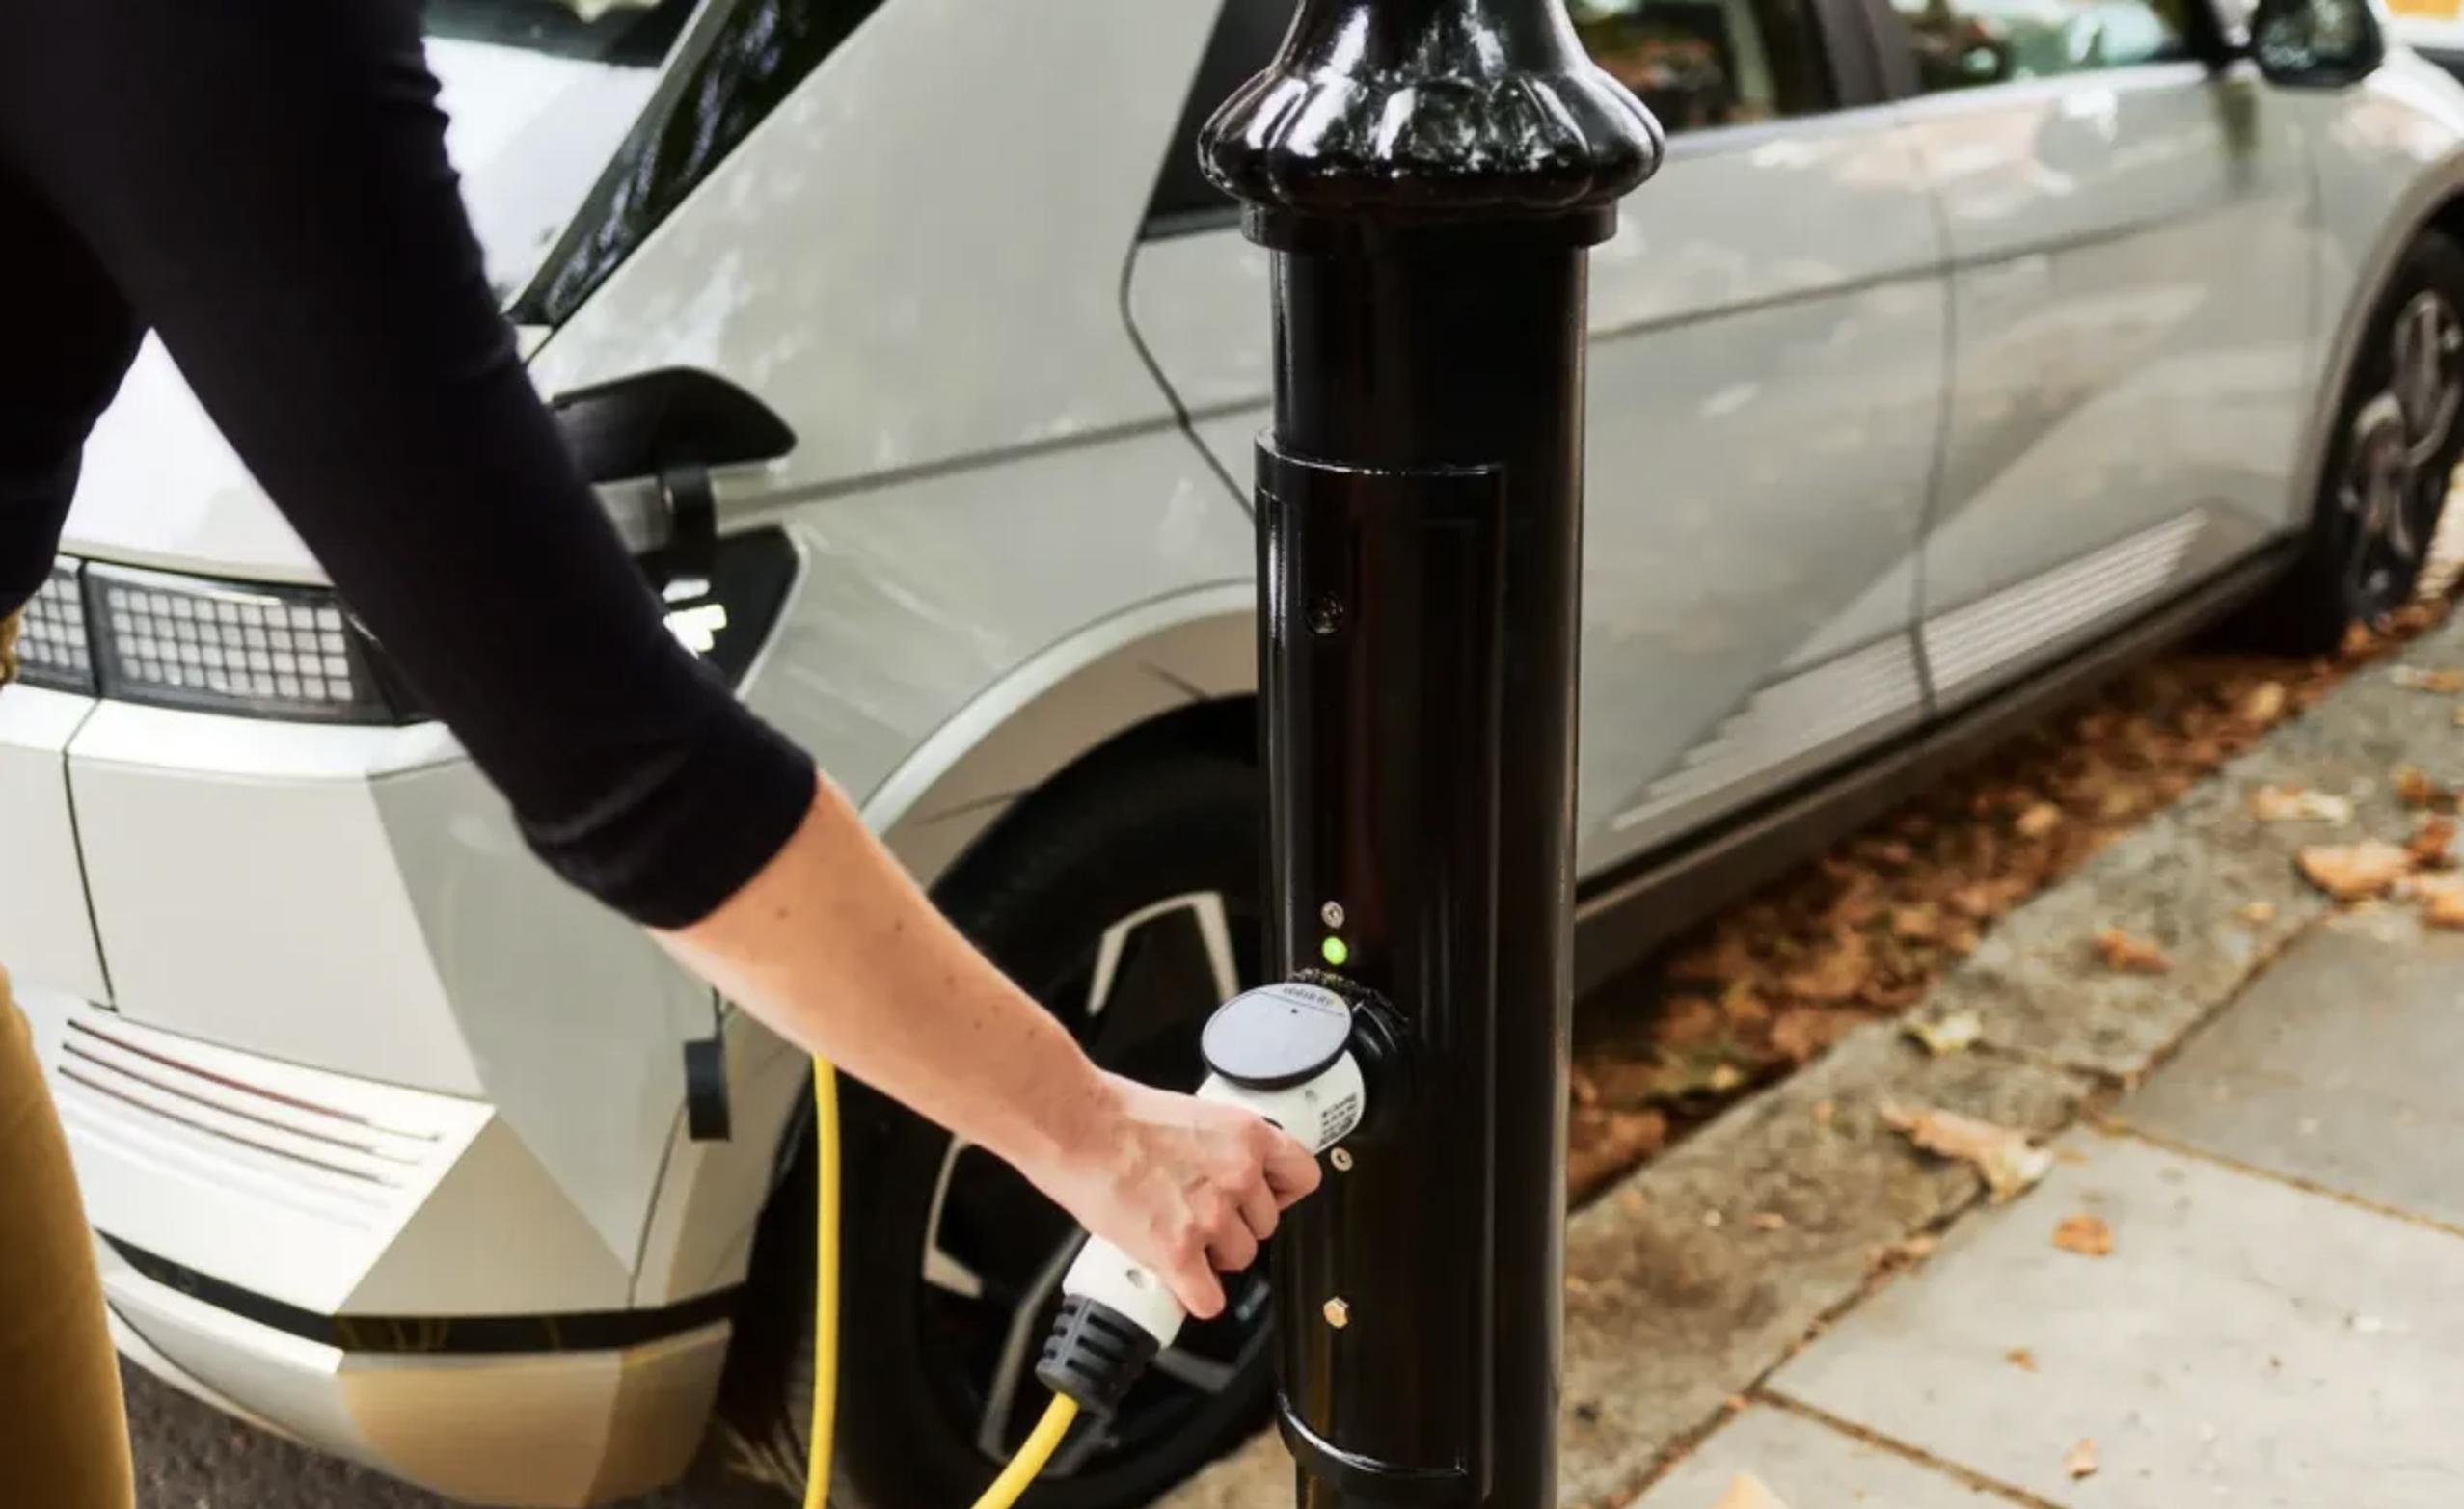 Bexley selects Ubitricity to provide 100 chargepoints